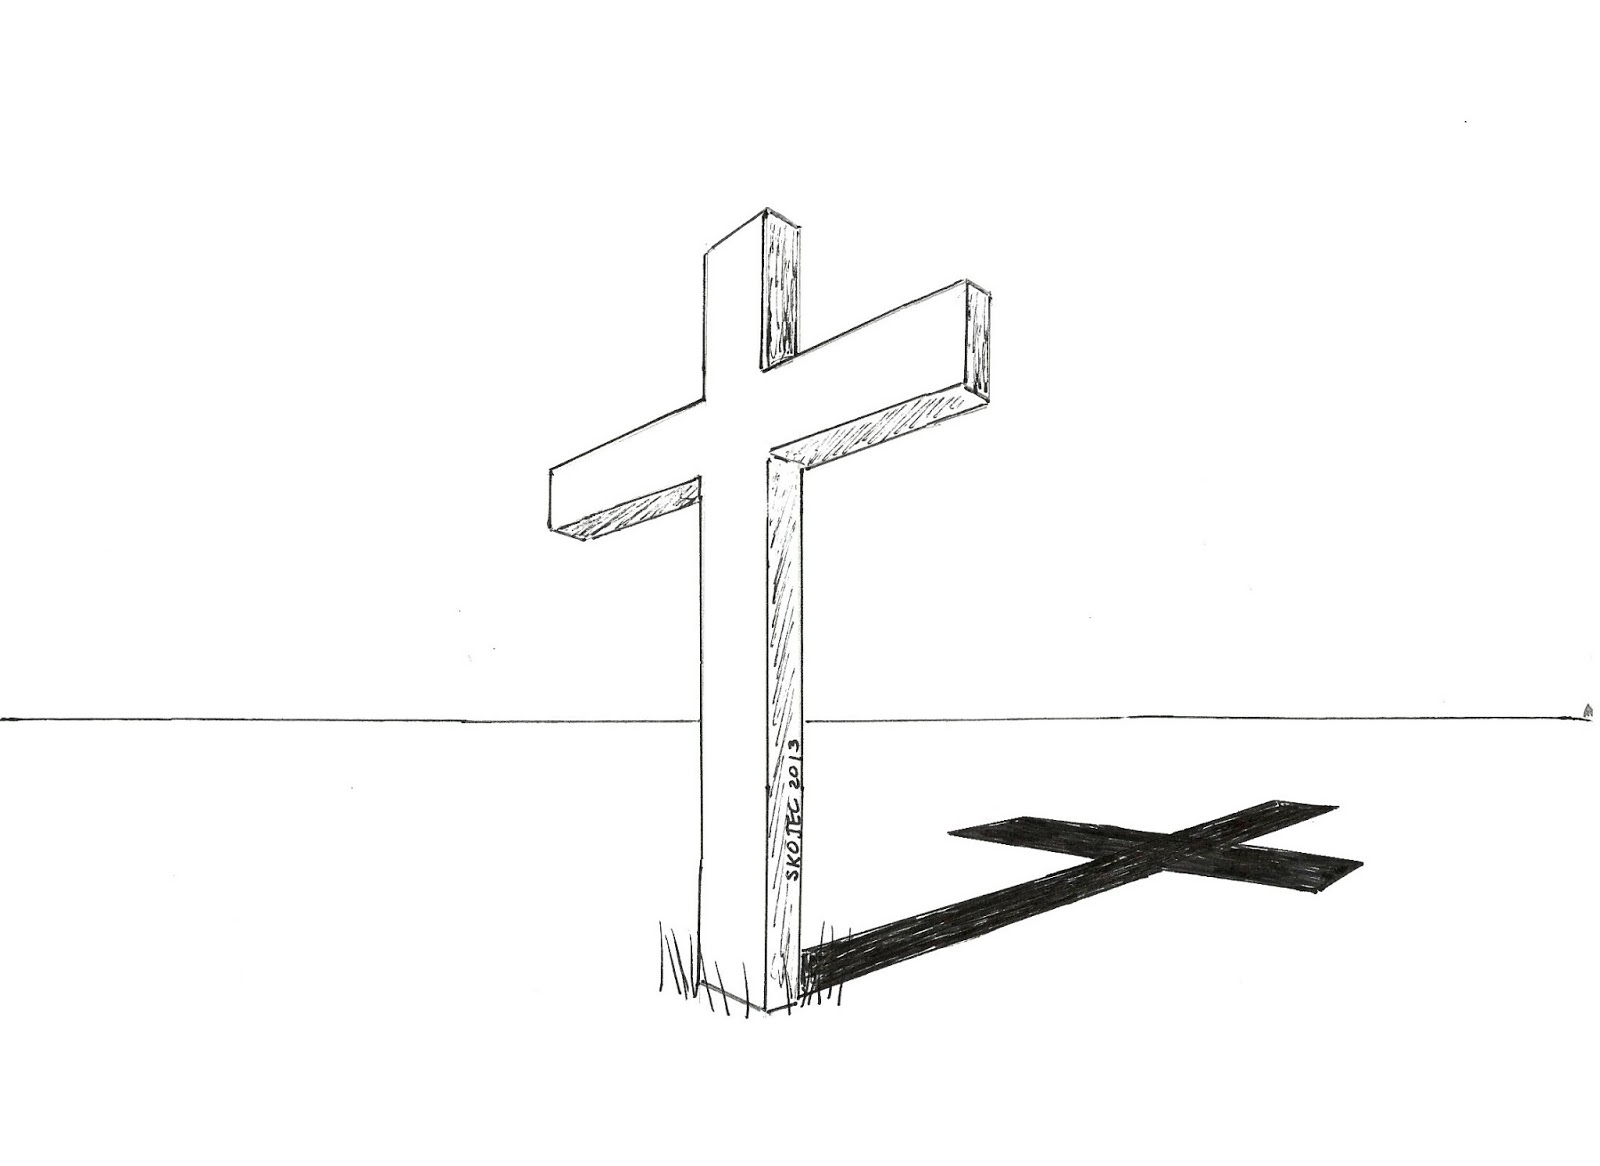 How To Draw Cool Crosses